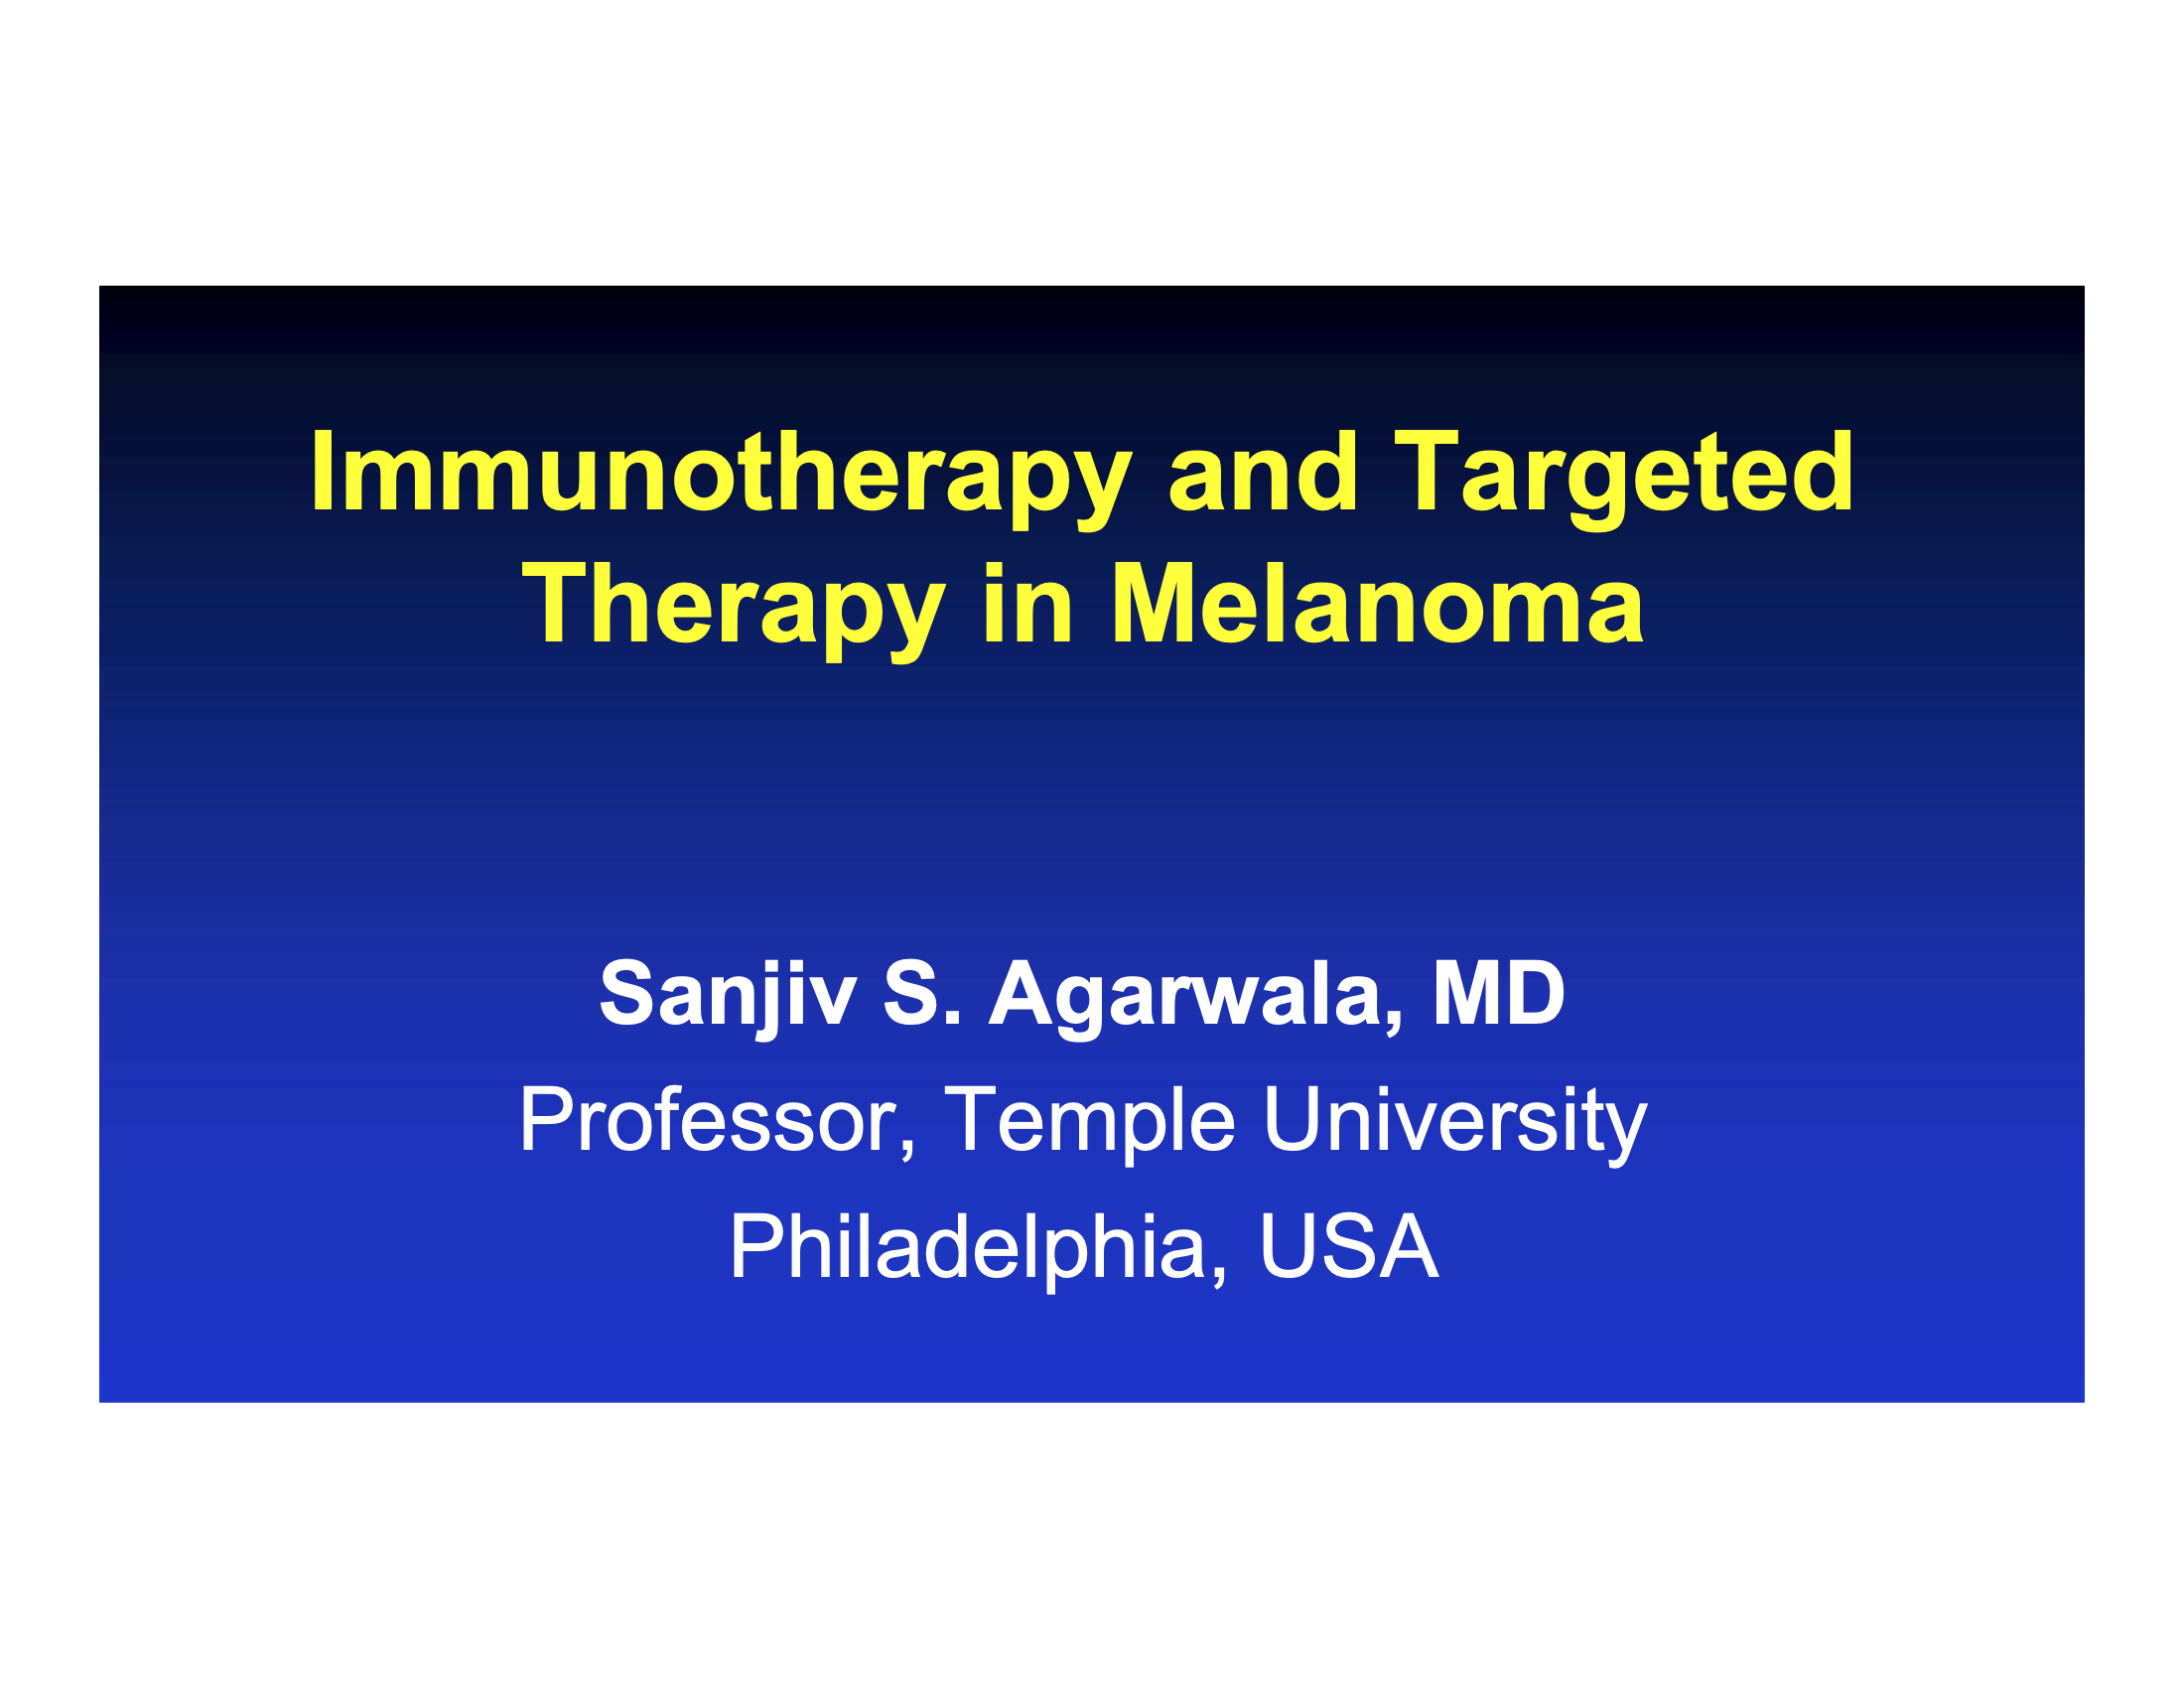 Immunotherapy and Targeted Therapy in Melanoma